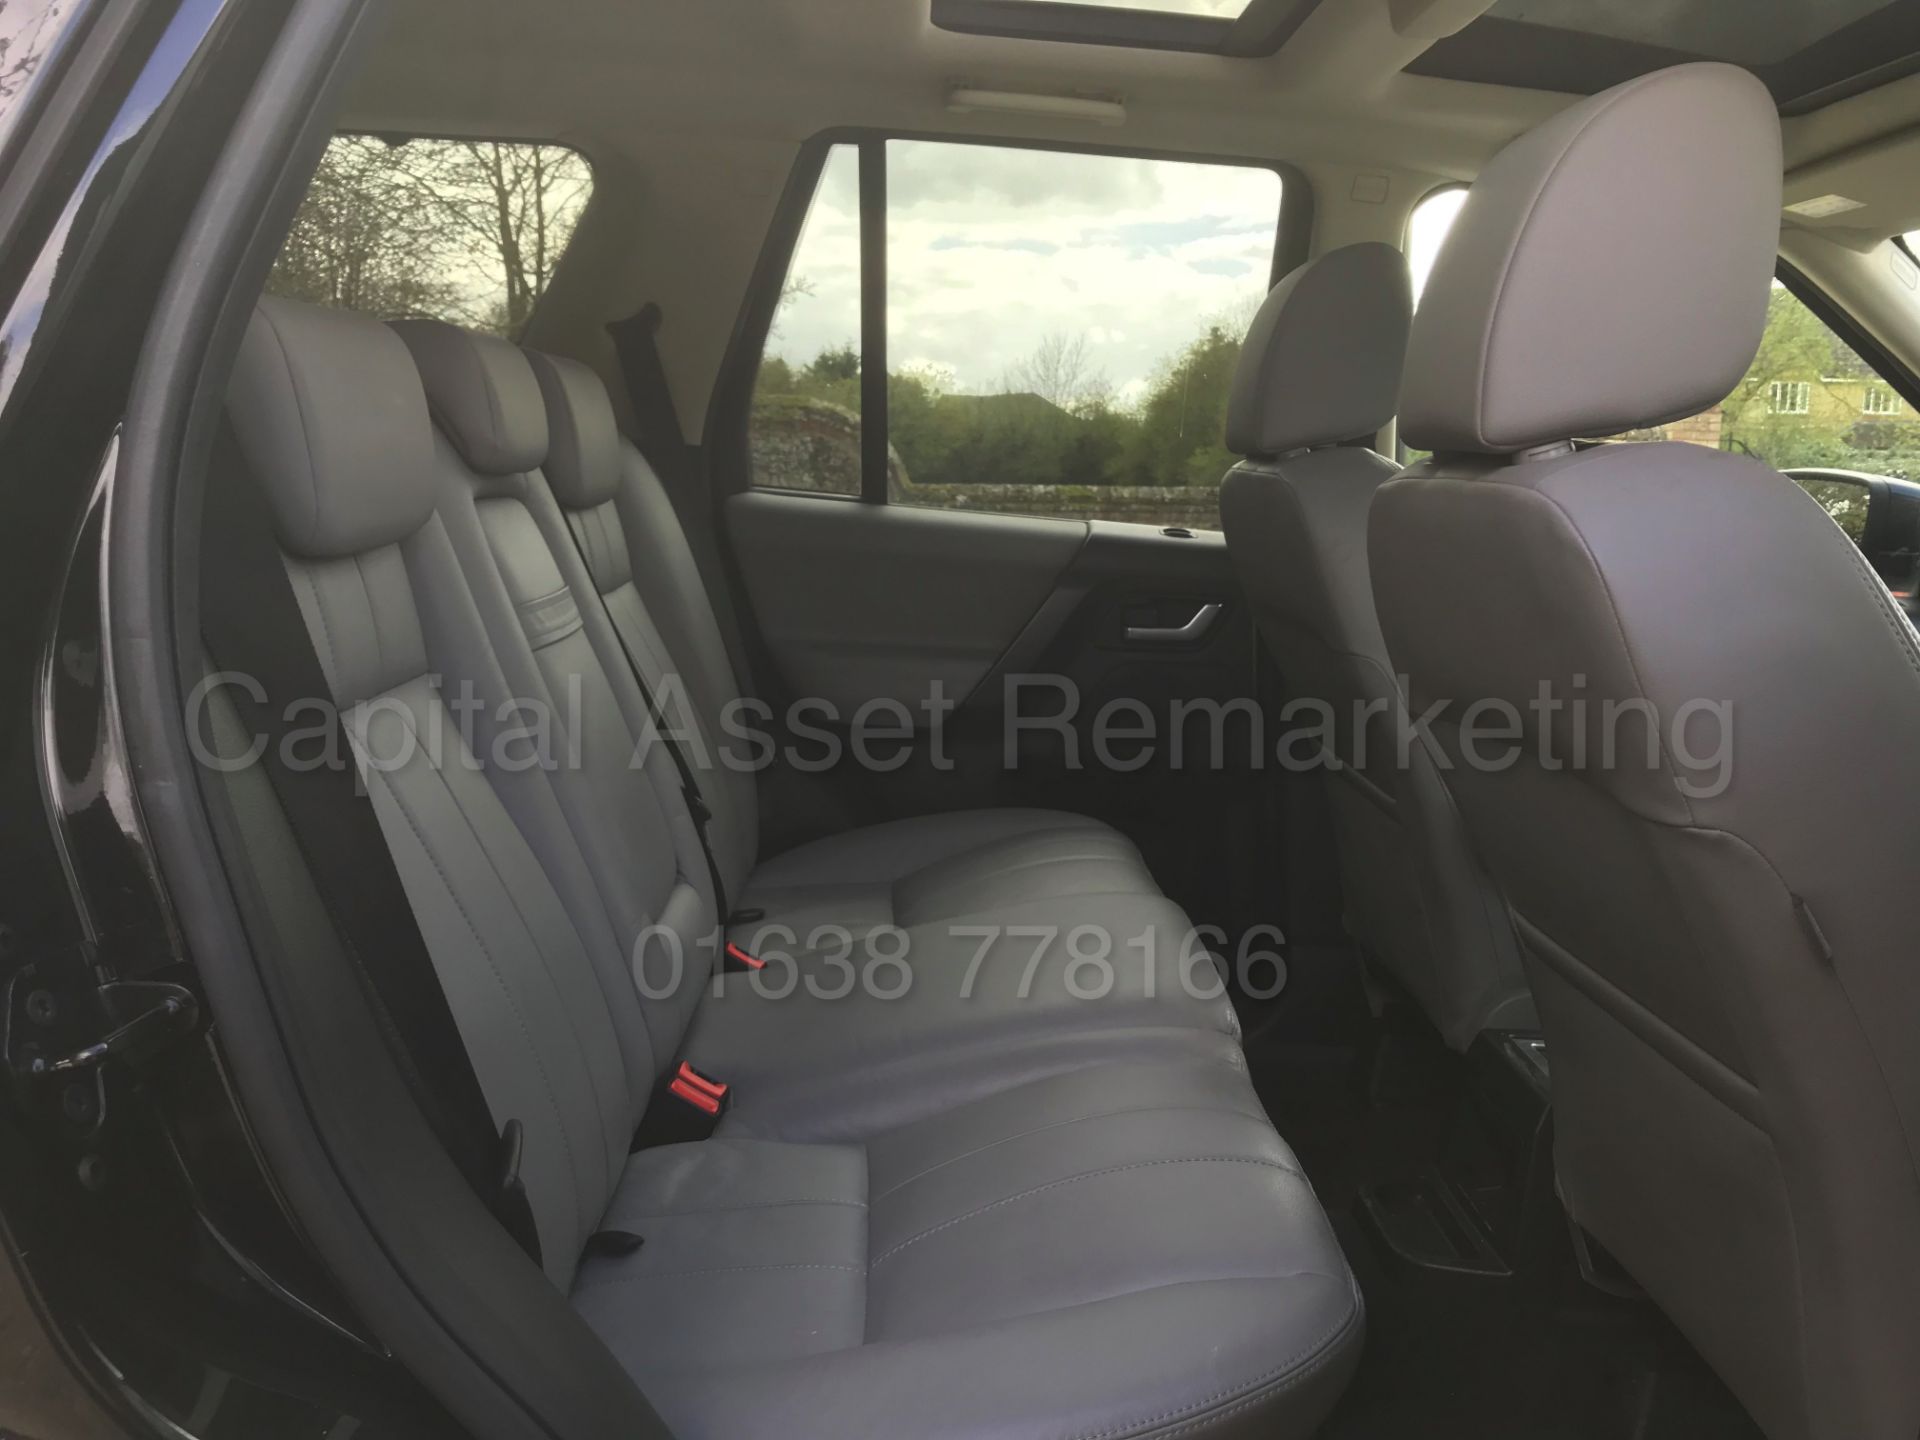 (On Sale) LAND ROVER FREELANDER 'HSE EDITION' (2011) '2.2 SD4 - AUTO' *SAT NAV - LEATHER - PAN ROOF* - Image 28 of 45